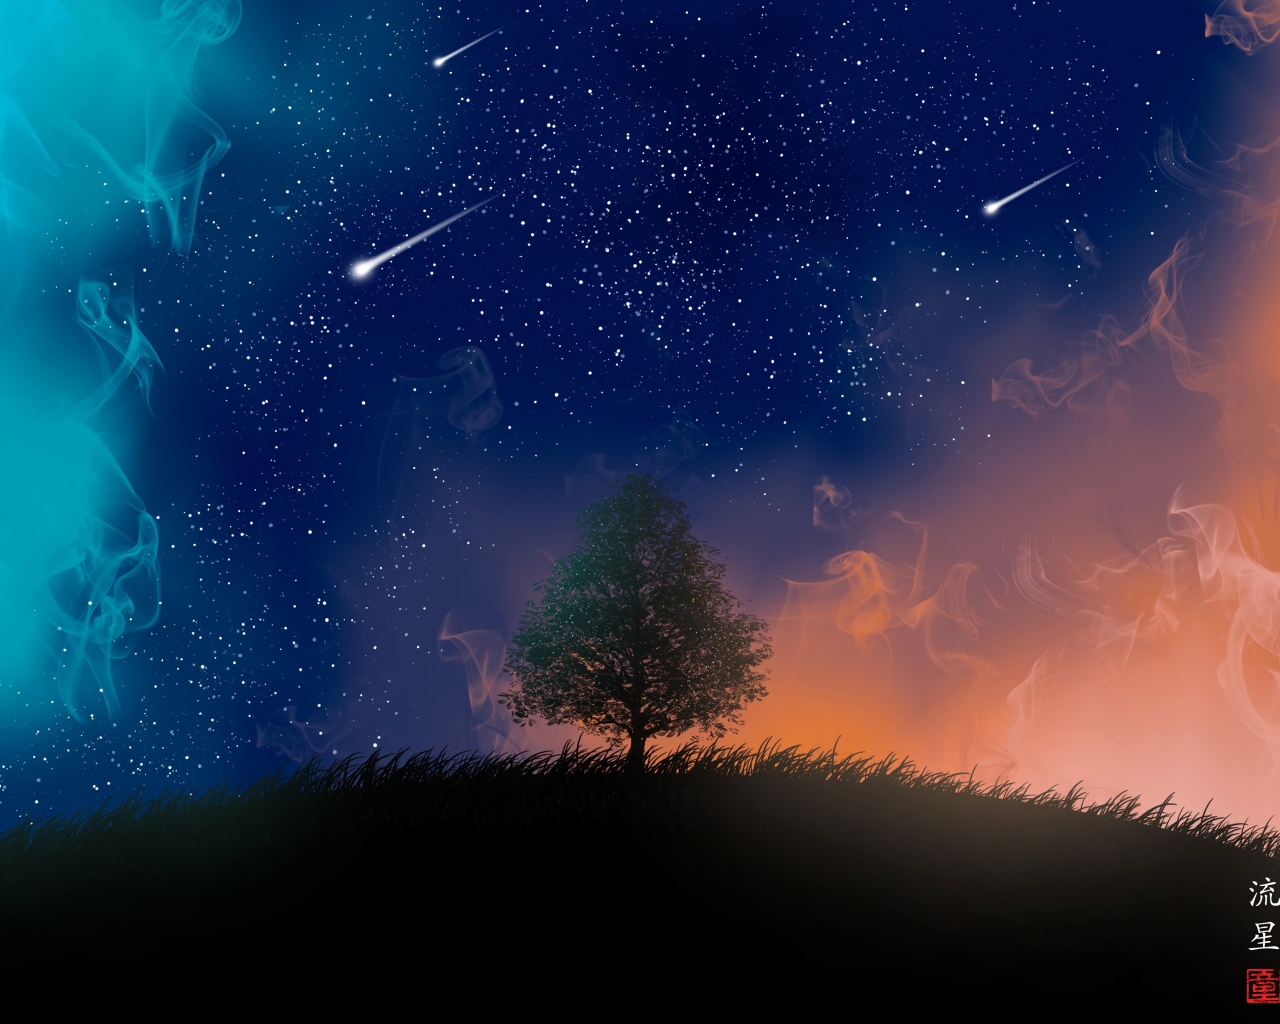 1280x1024 Tree And Shooting Stars 4k 1280x1024 Resolution Wallpaper Hd Artist 4k Wallpapers Images Photos And Background